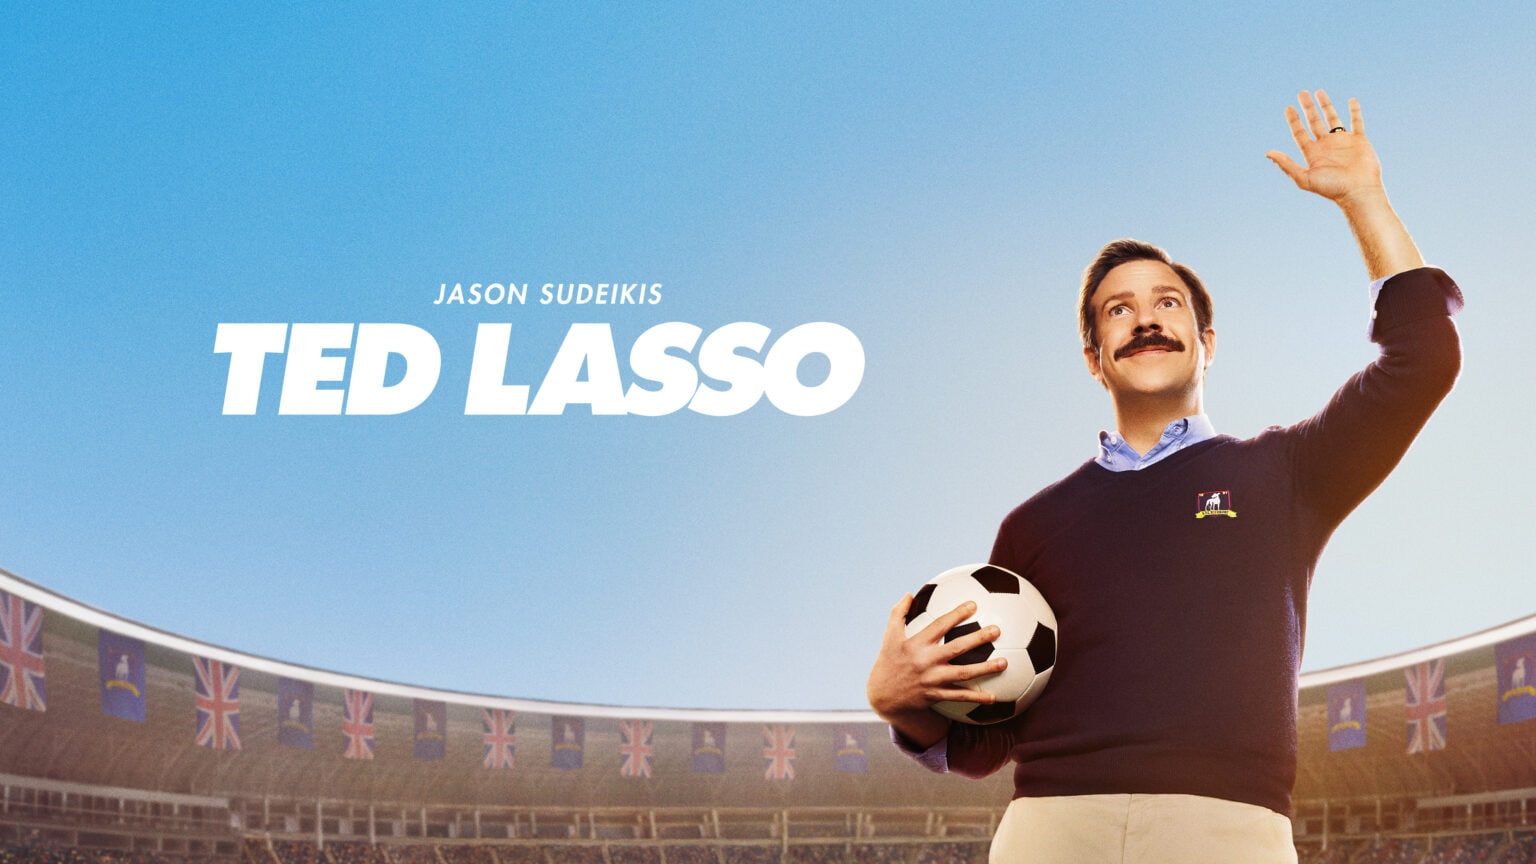 Jason Sudeikis plays a clueless college football coach in the Apple TV+ comedy series 